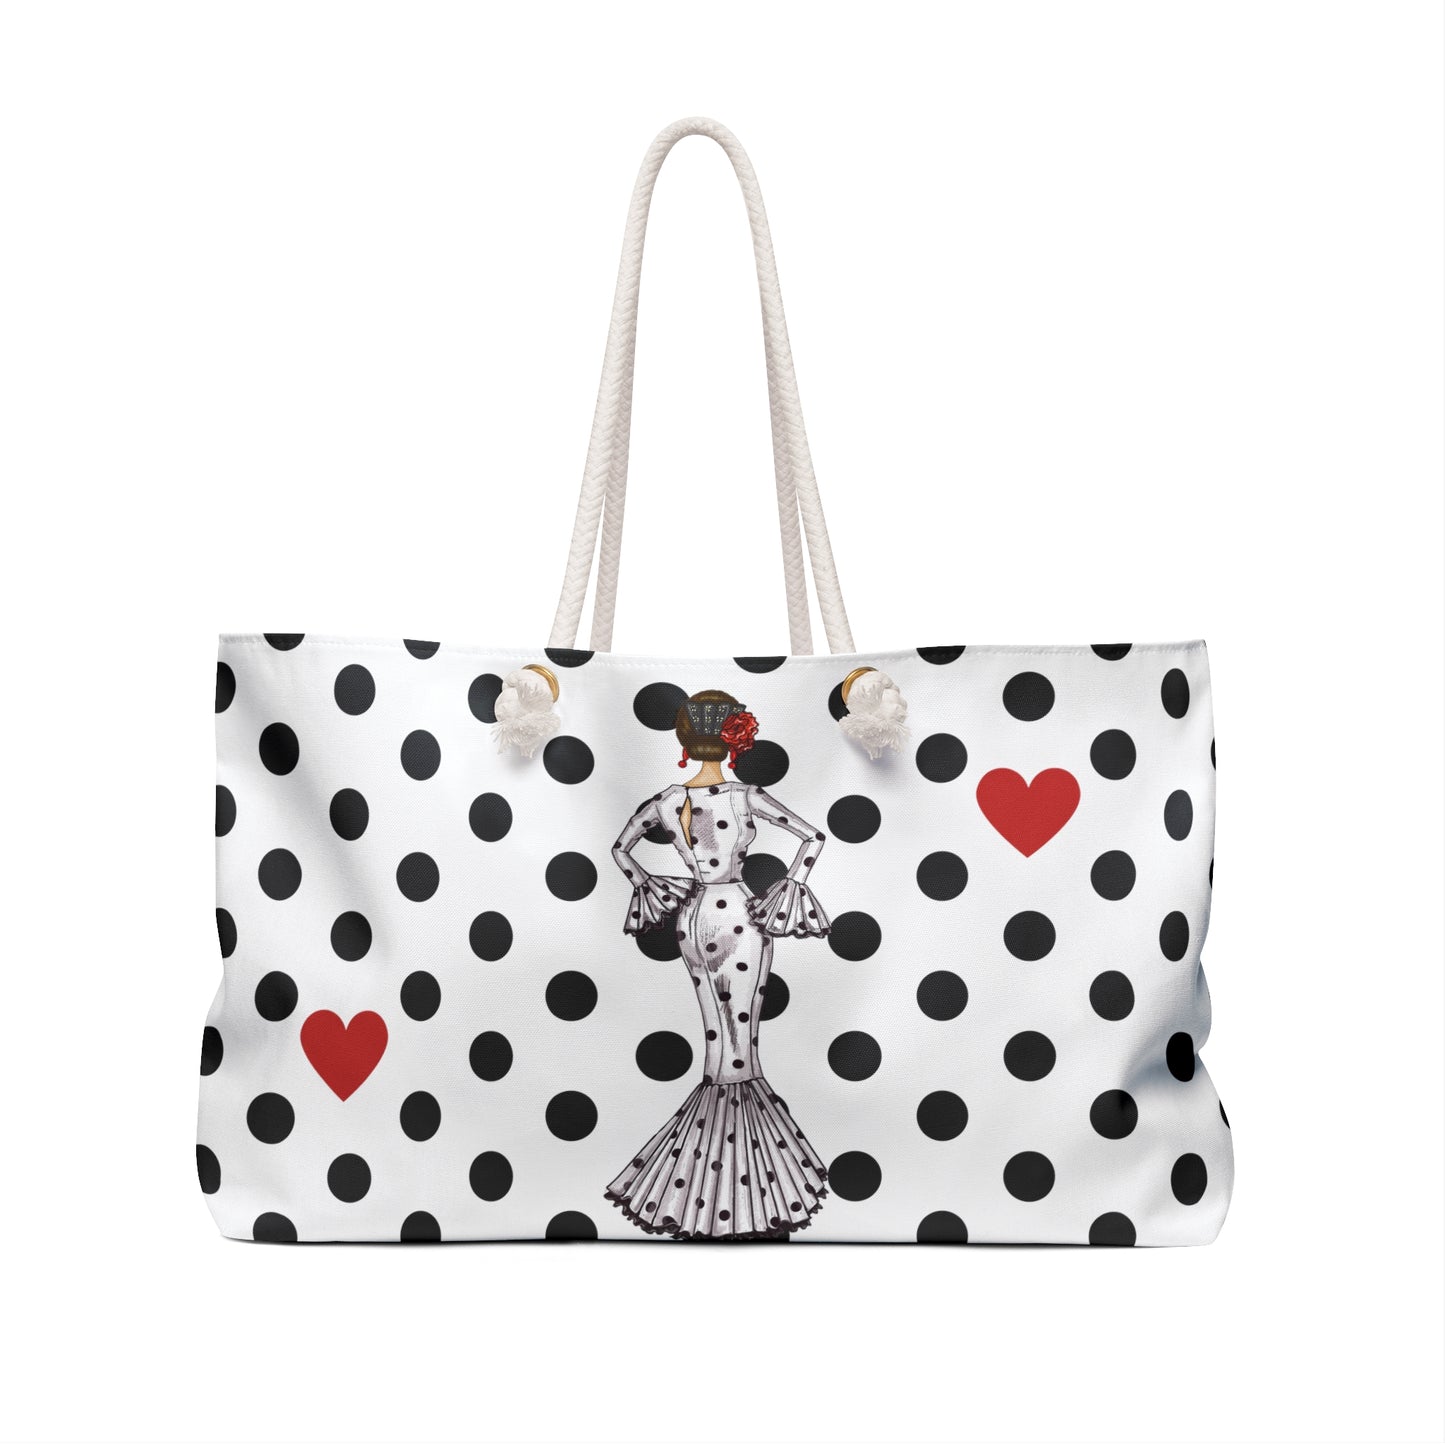 a polka dot bag with a woman's face on it